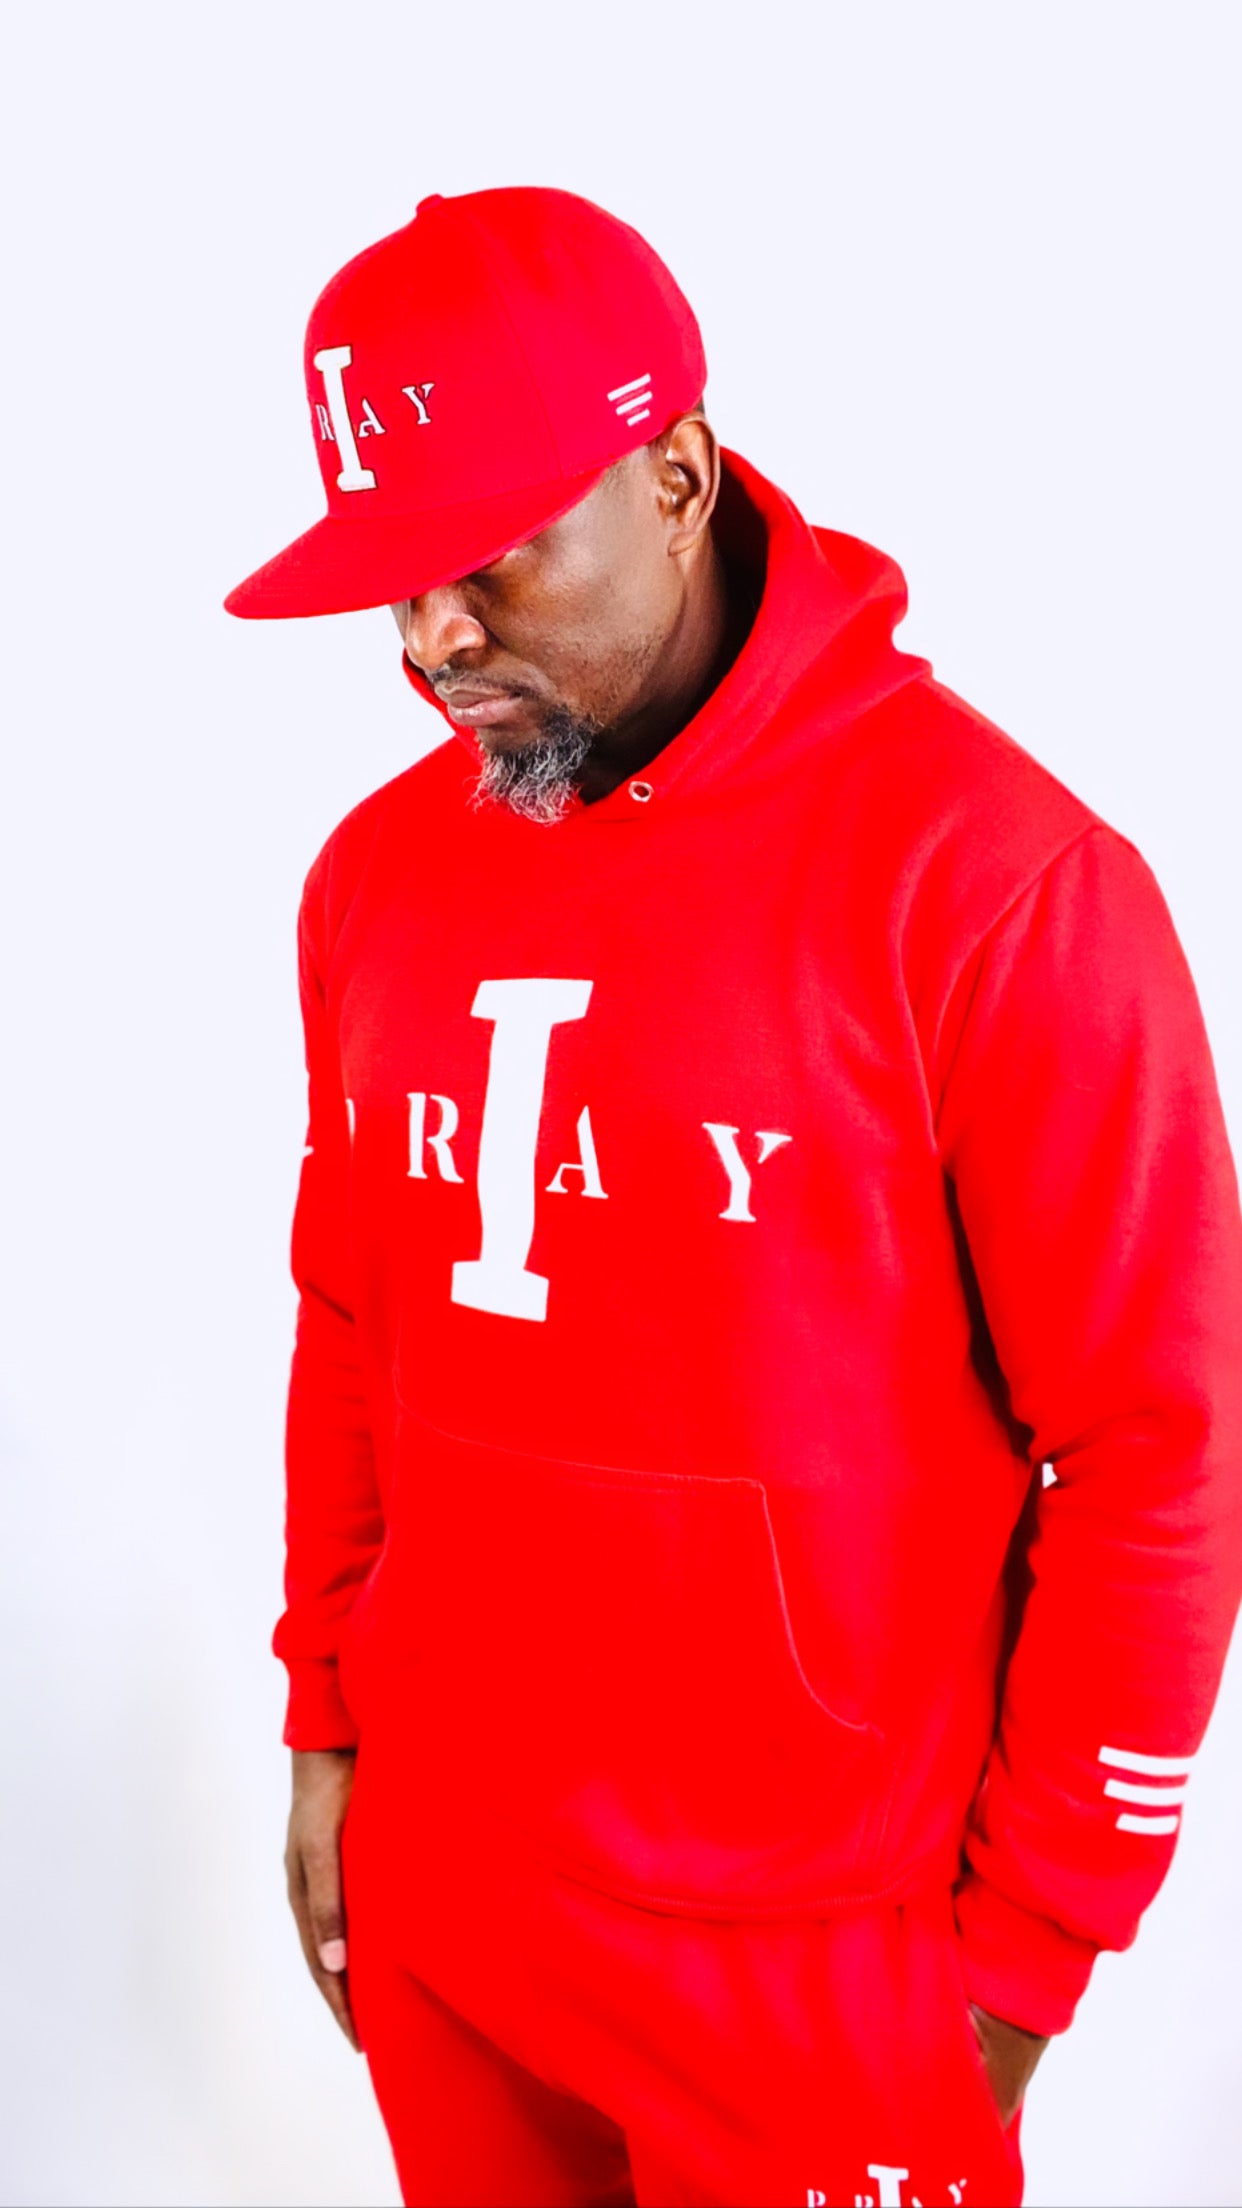 I Pray Track Suit (Red)